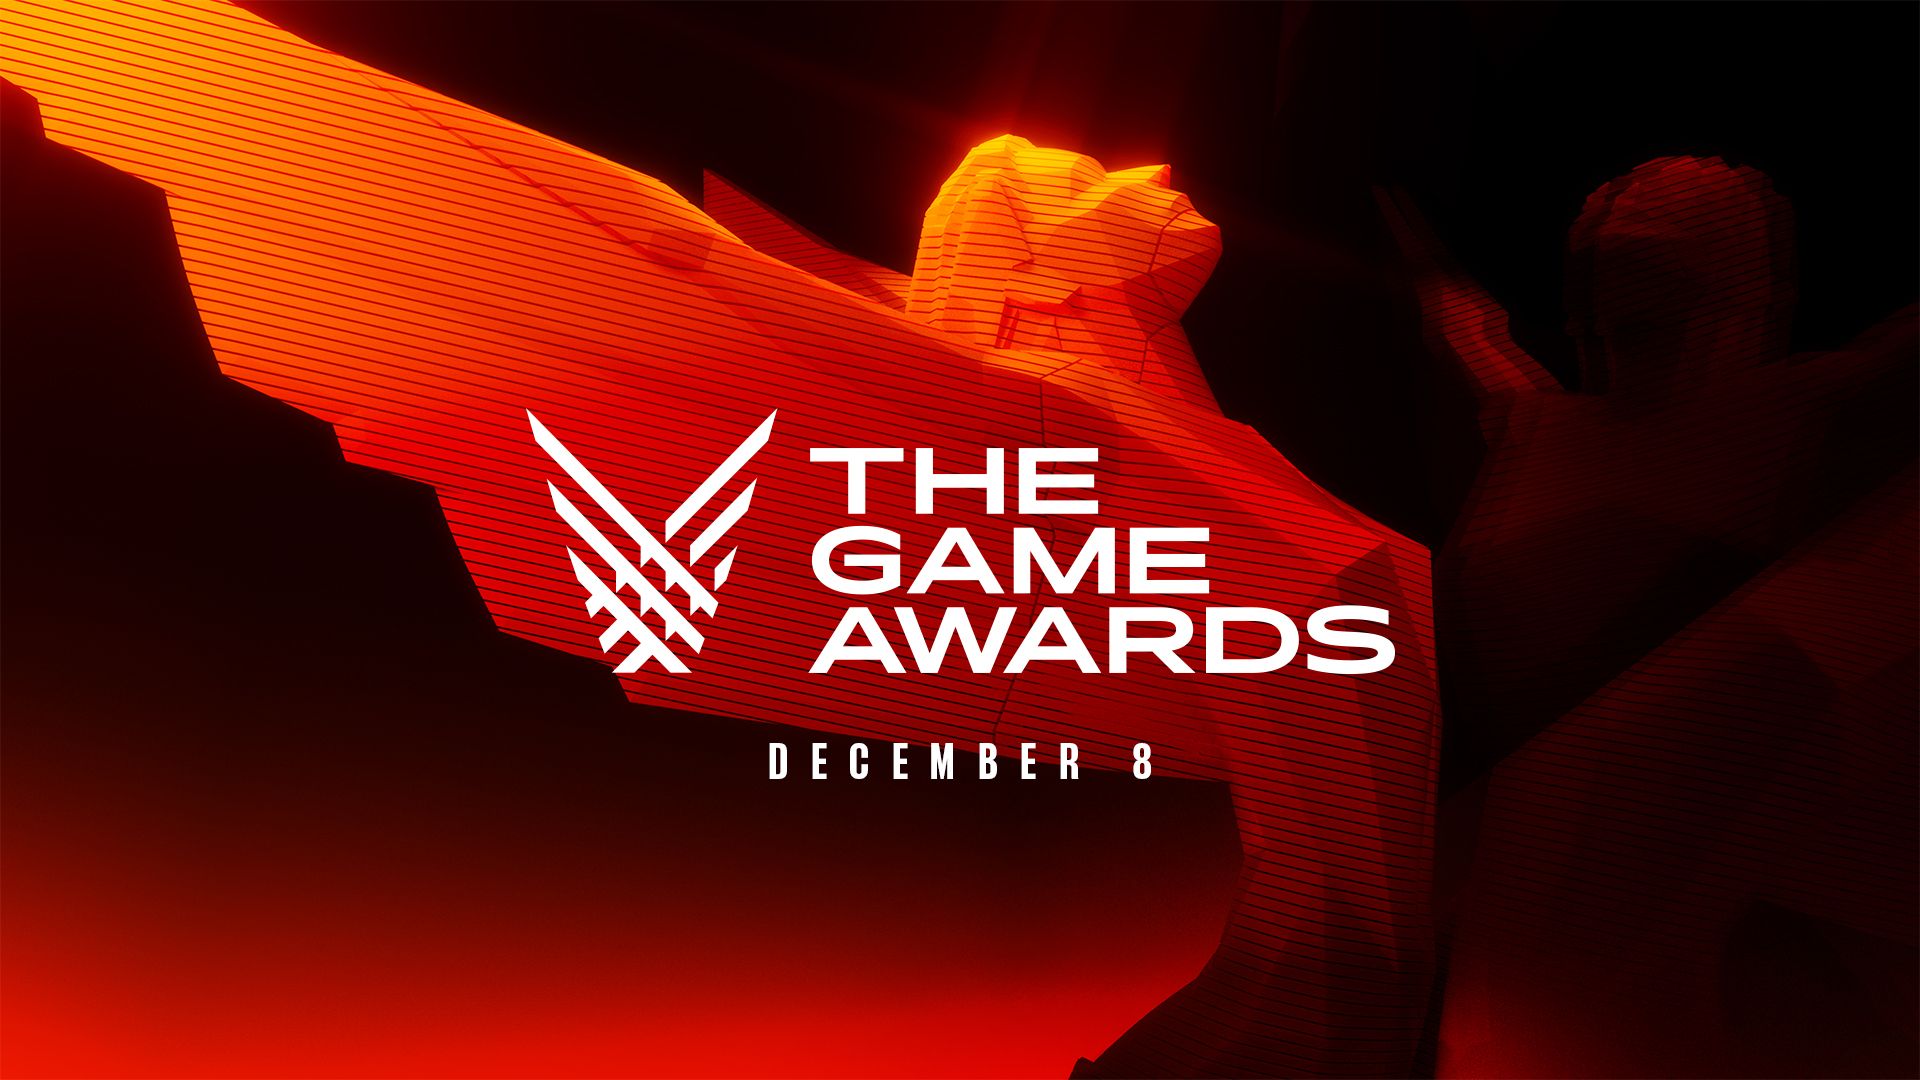 The Game Awards 2018 viewers can expect more than 10 new games to be  announced